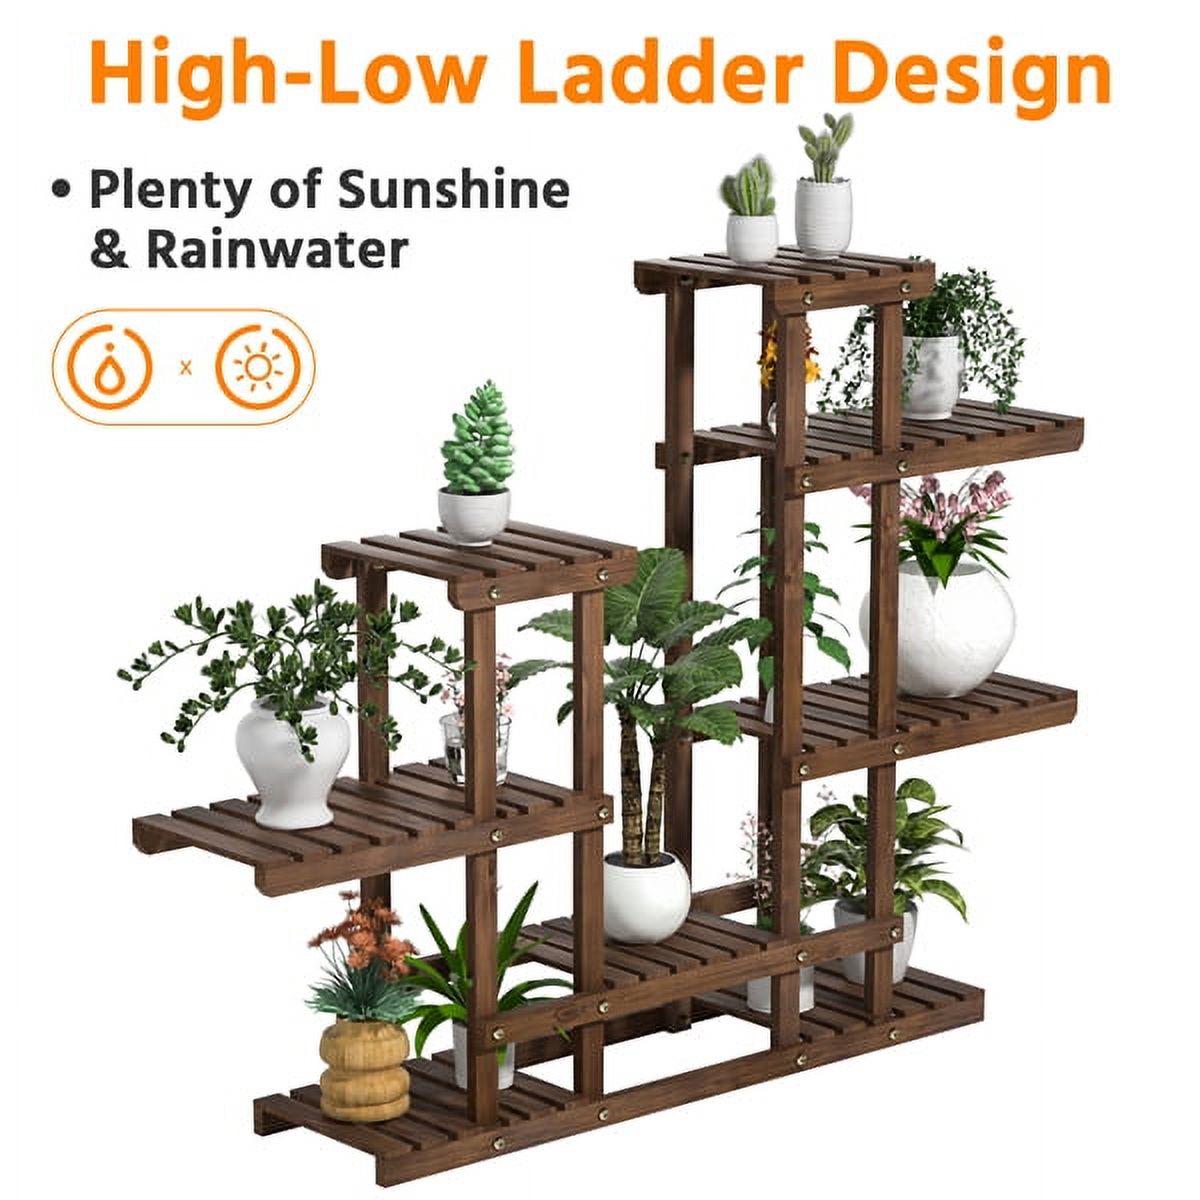 SmileMart 6-Tier Wooden Flower and Plant Display Stand for Garden, 38" H, Brown - image 9 of 9